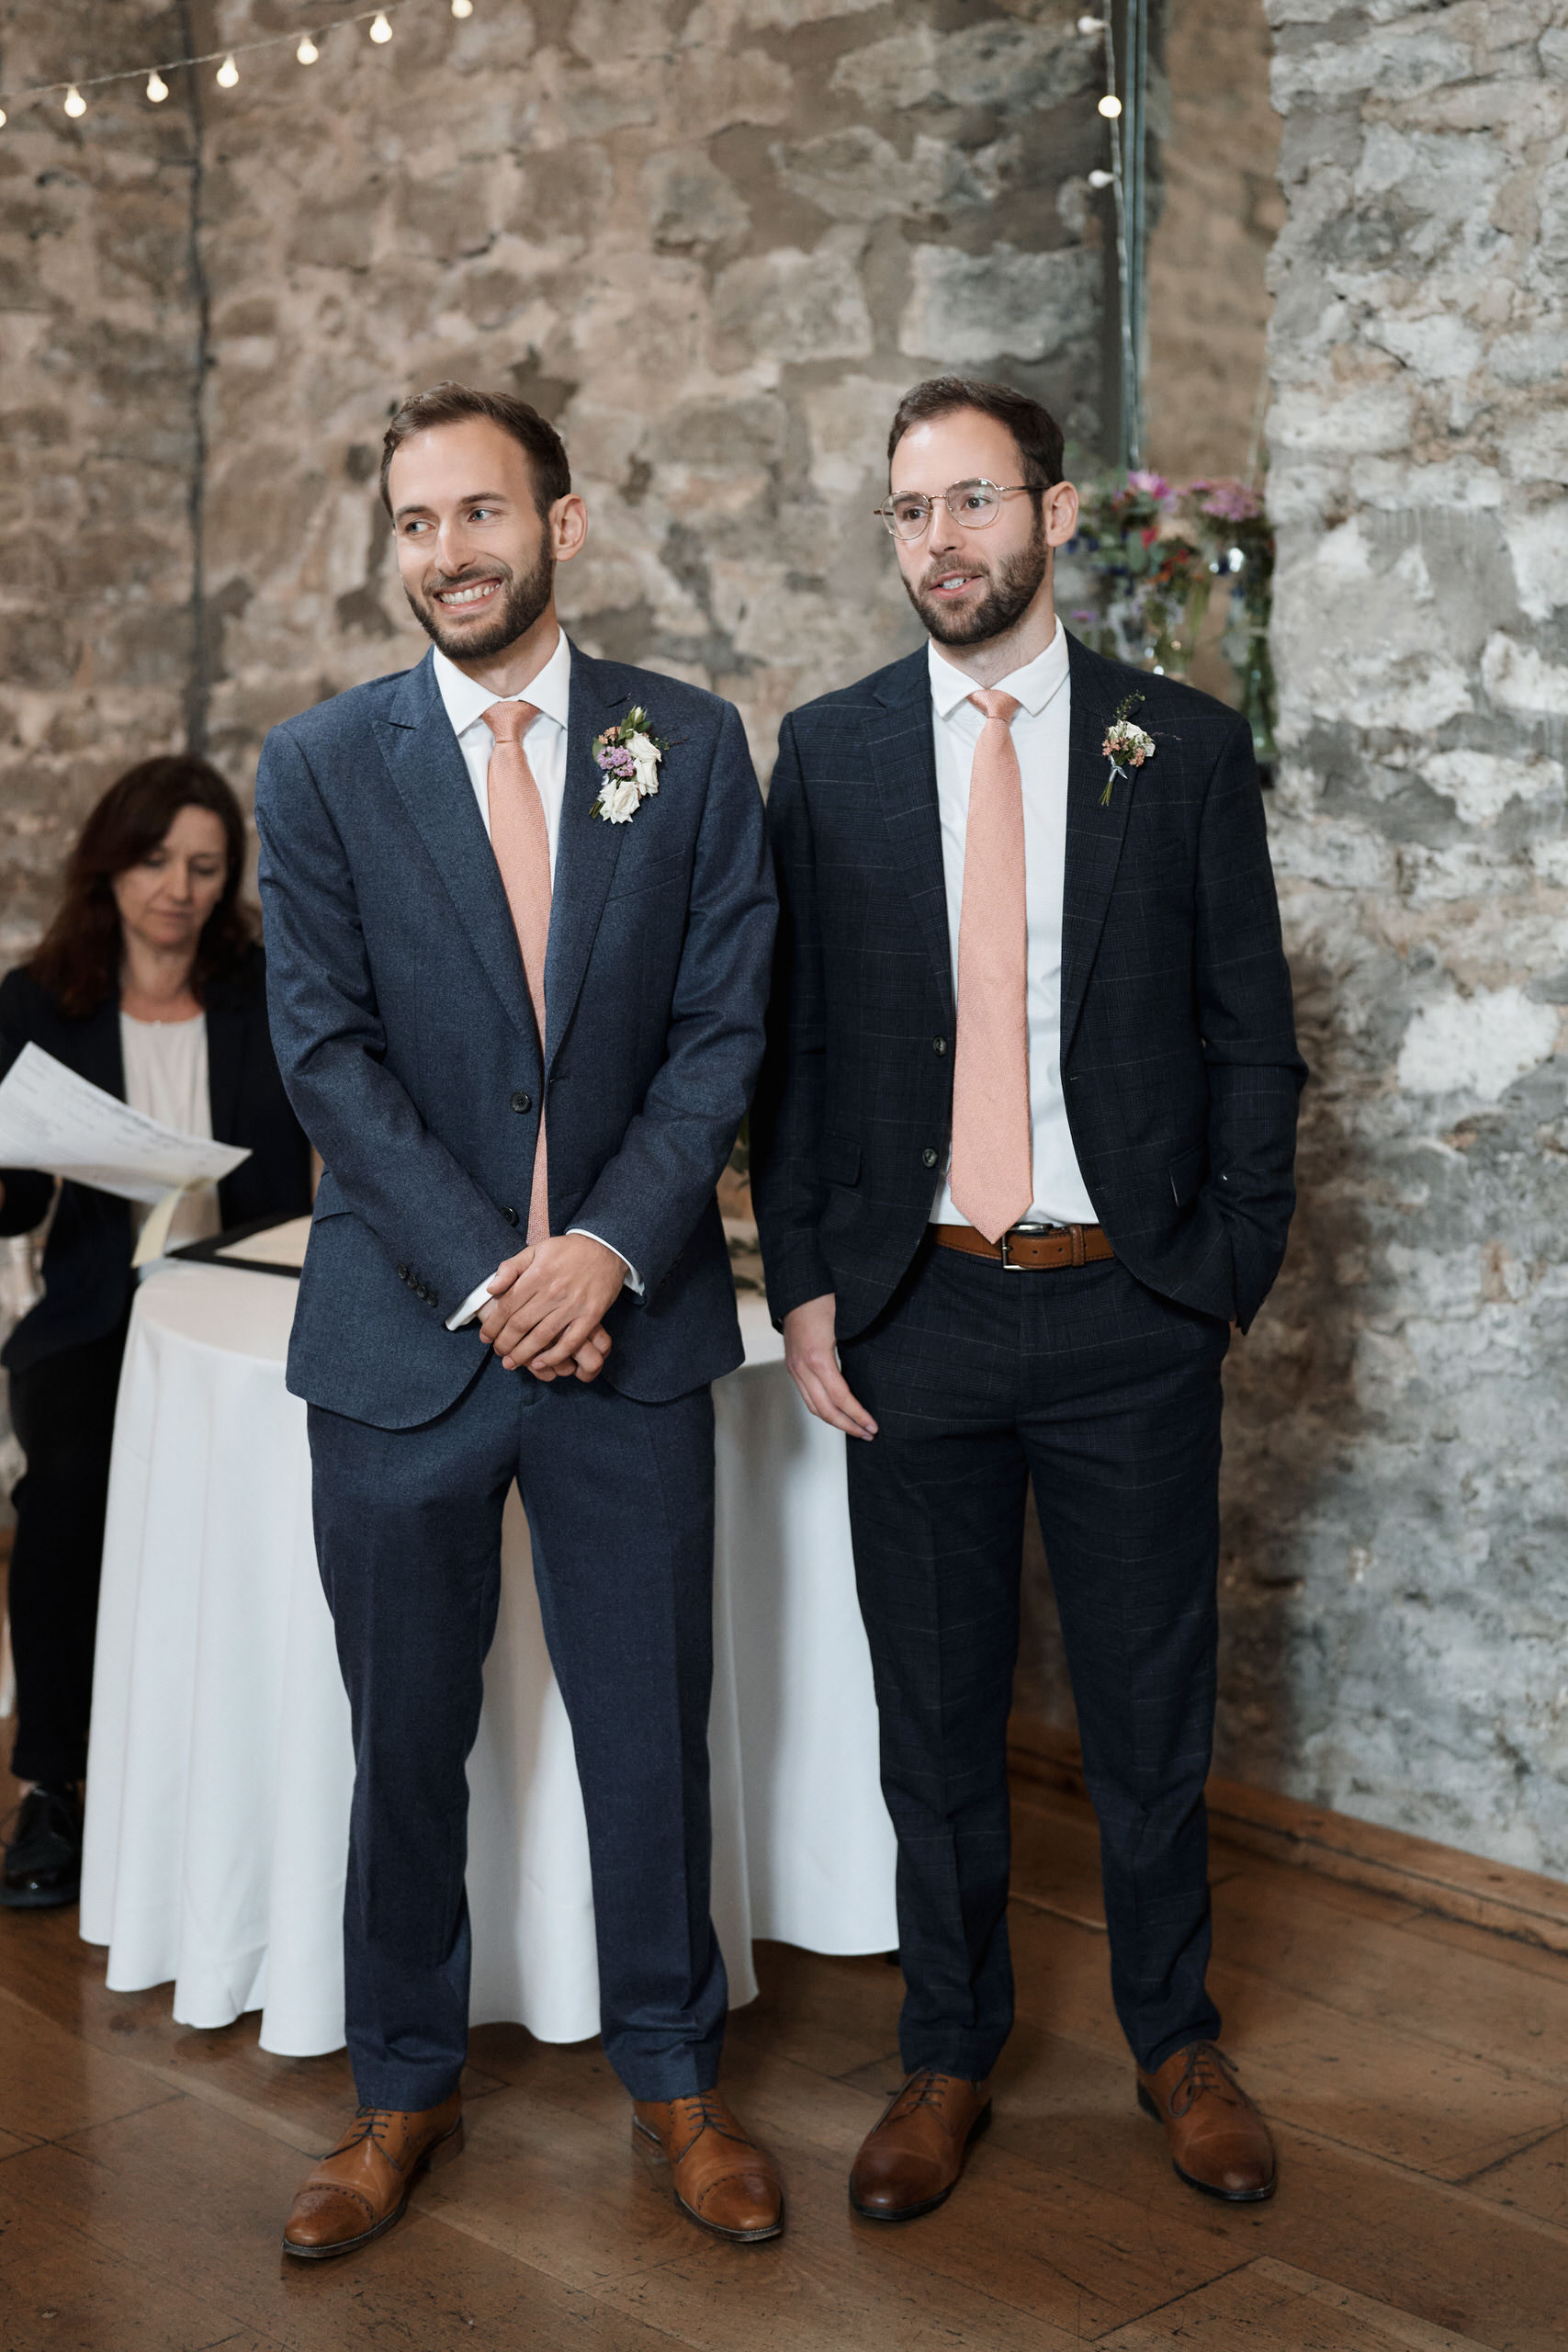 Two guys in suits are standing beside each other.